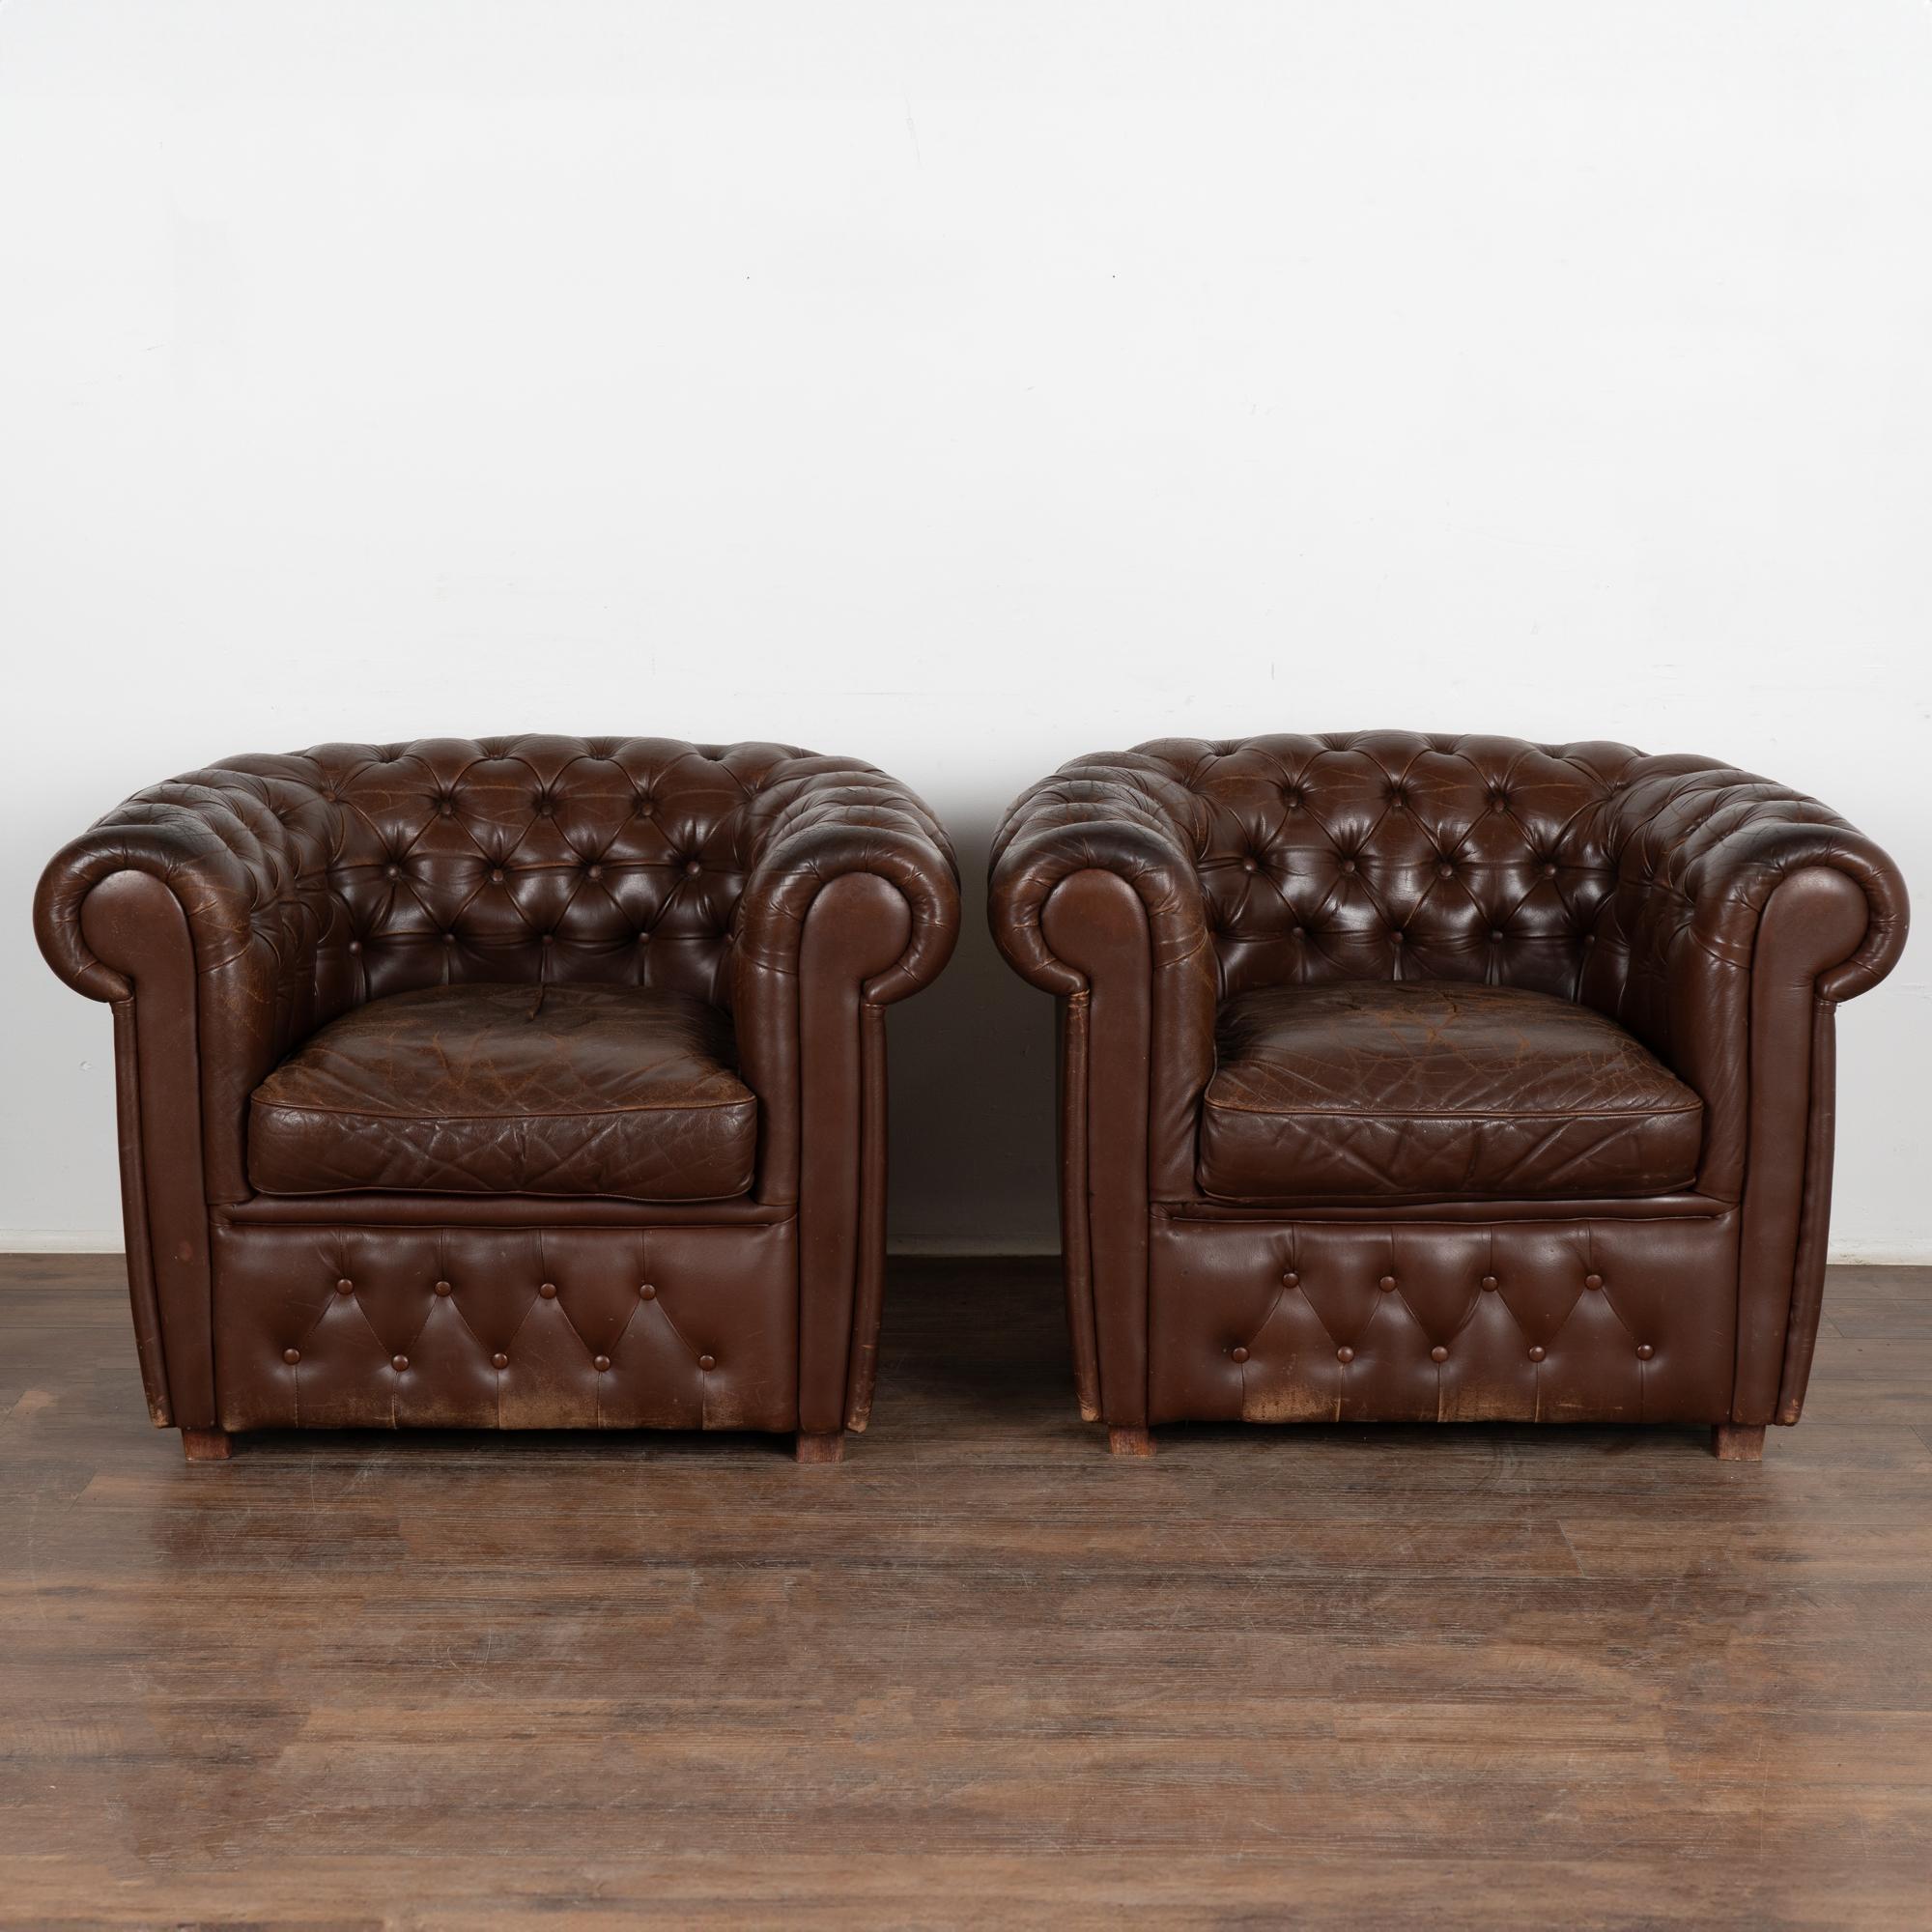 Chesterfield Style Brown Leather 3 Seat Sofa & 2 Club Chairs, circa 1920-40 For Sale 1